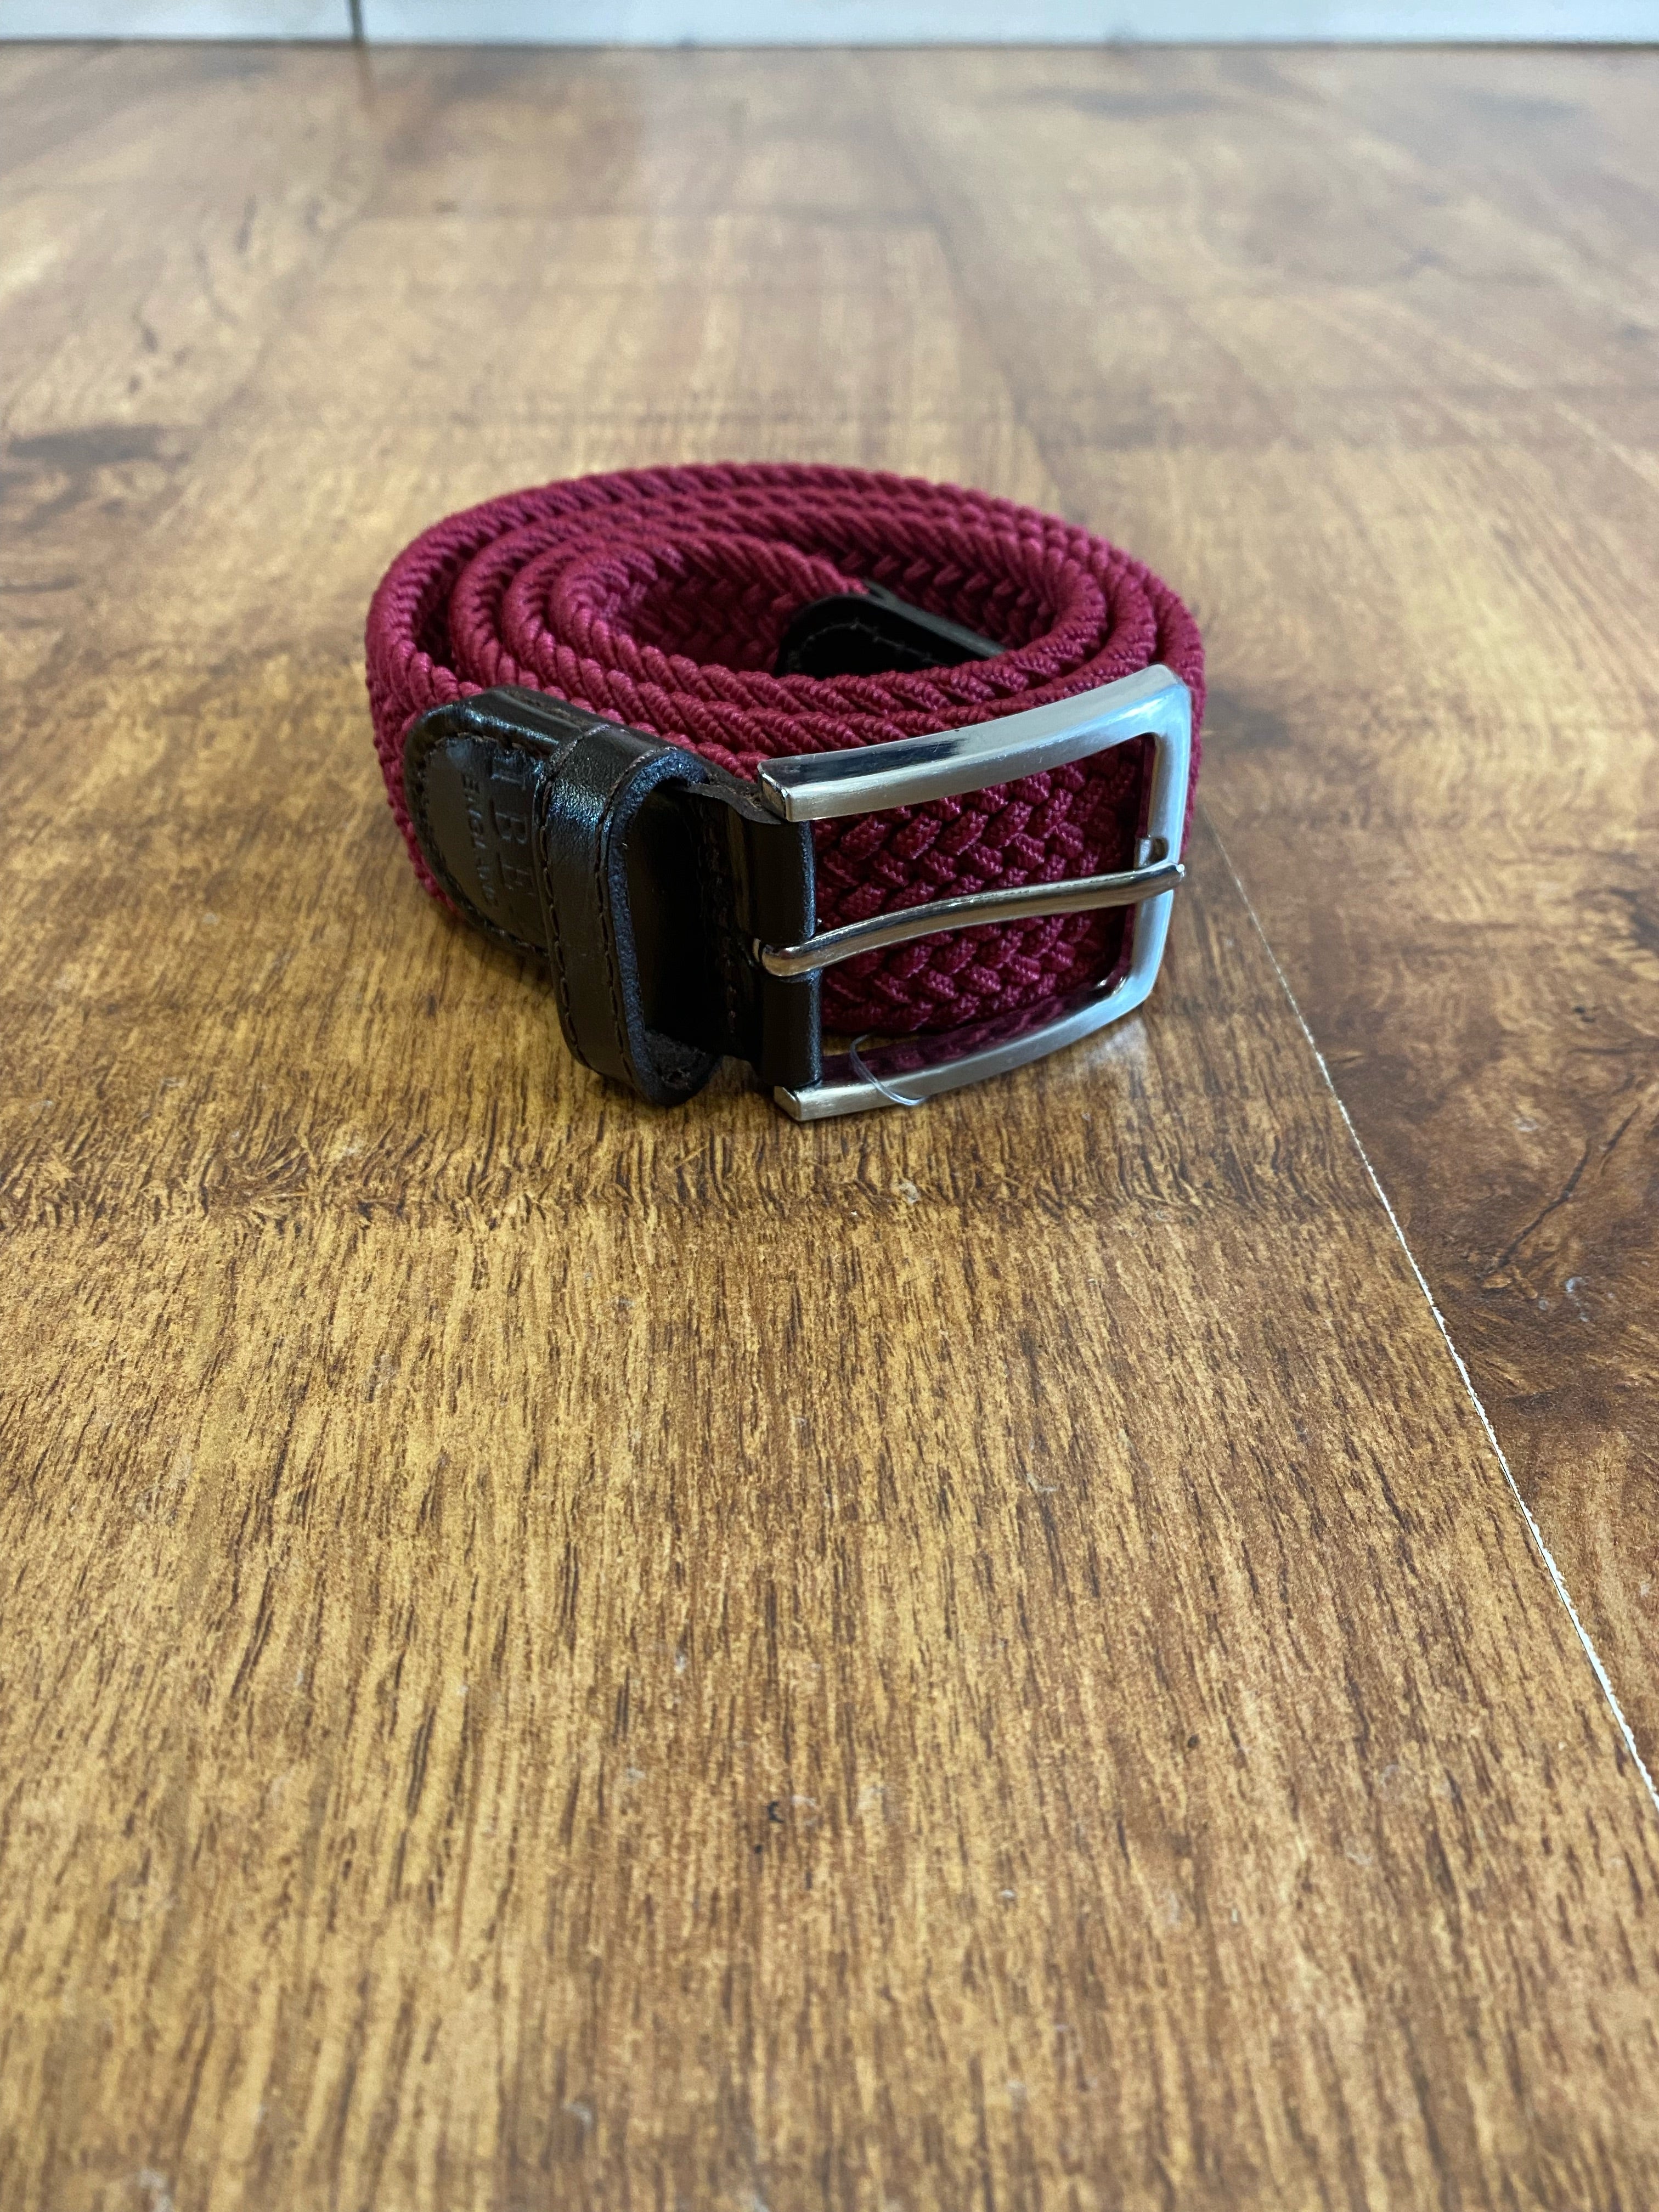 BURGUNDY WOVEN BELT FROM OXFORD LEATHER CRAFT